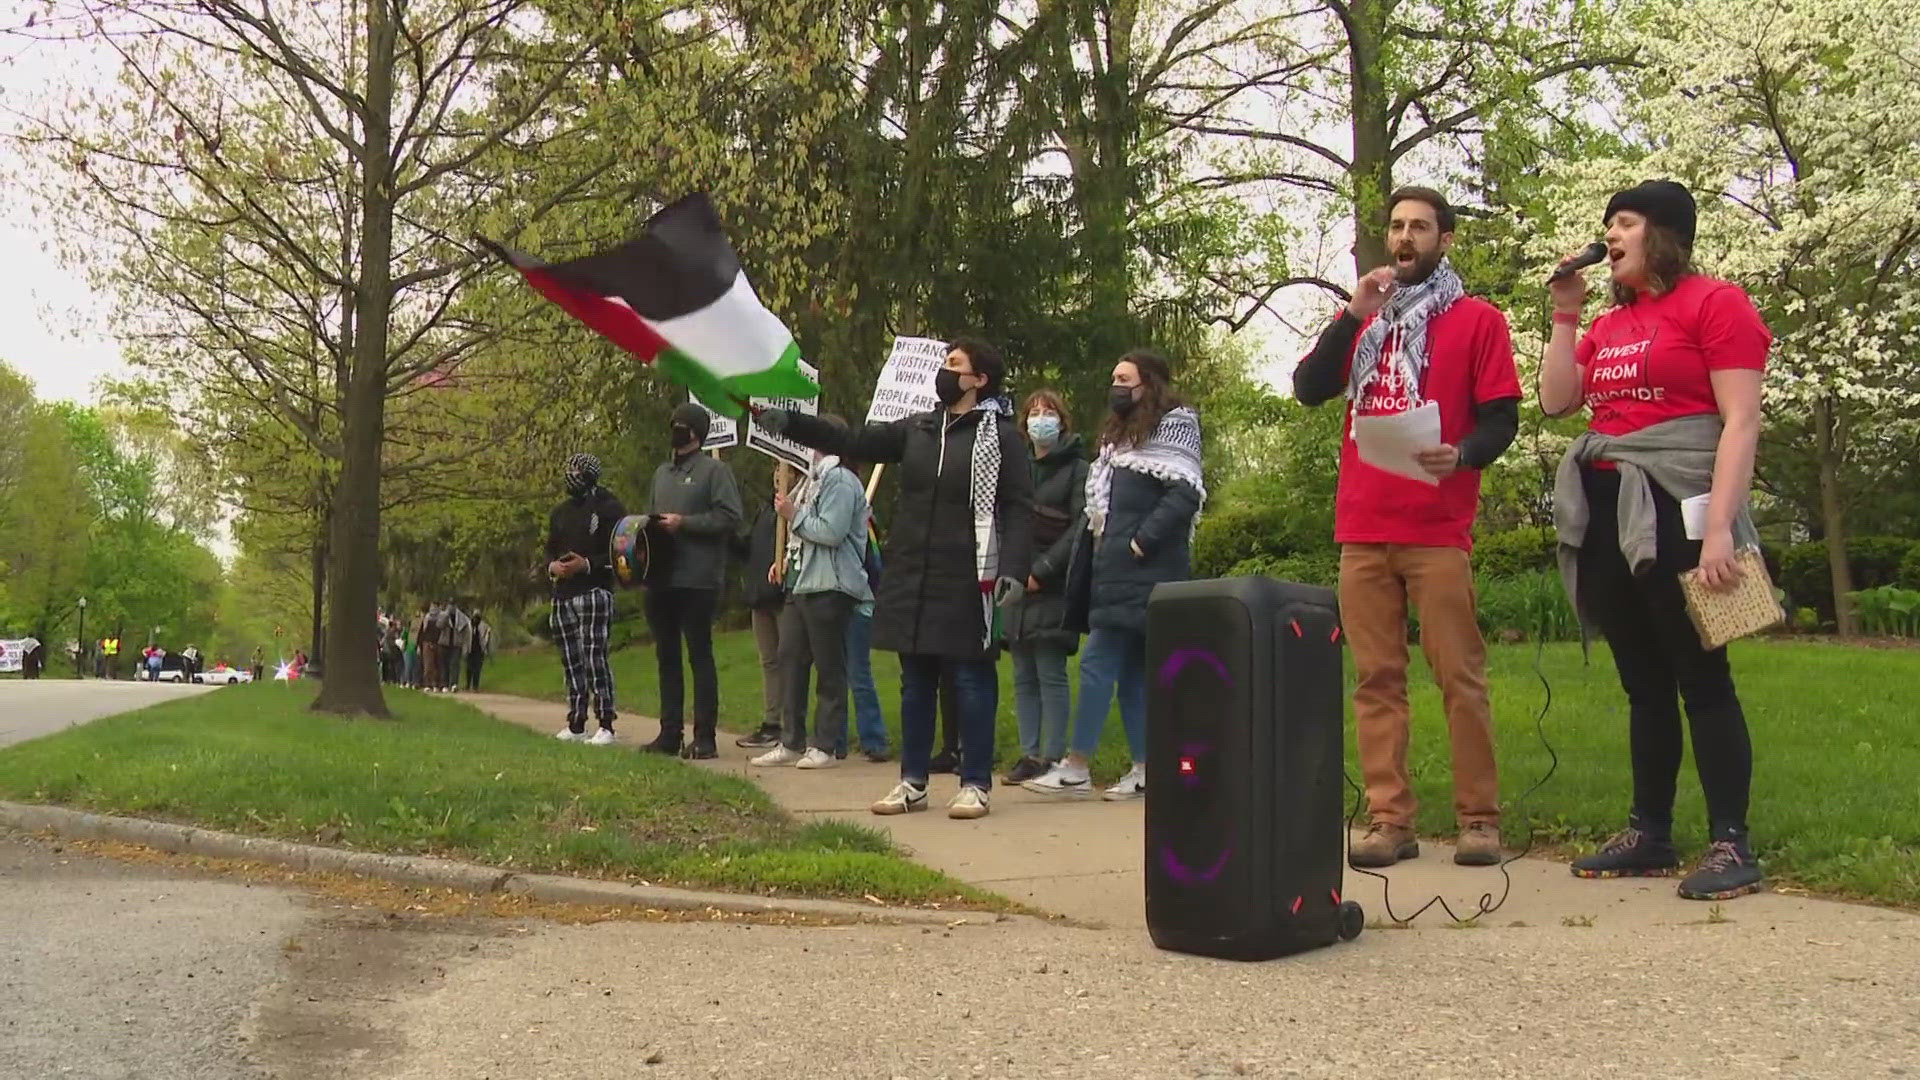 13News reporter Karen Campbell talks with protesters who are demanding a ceasefire in Gaza.